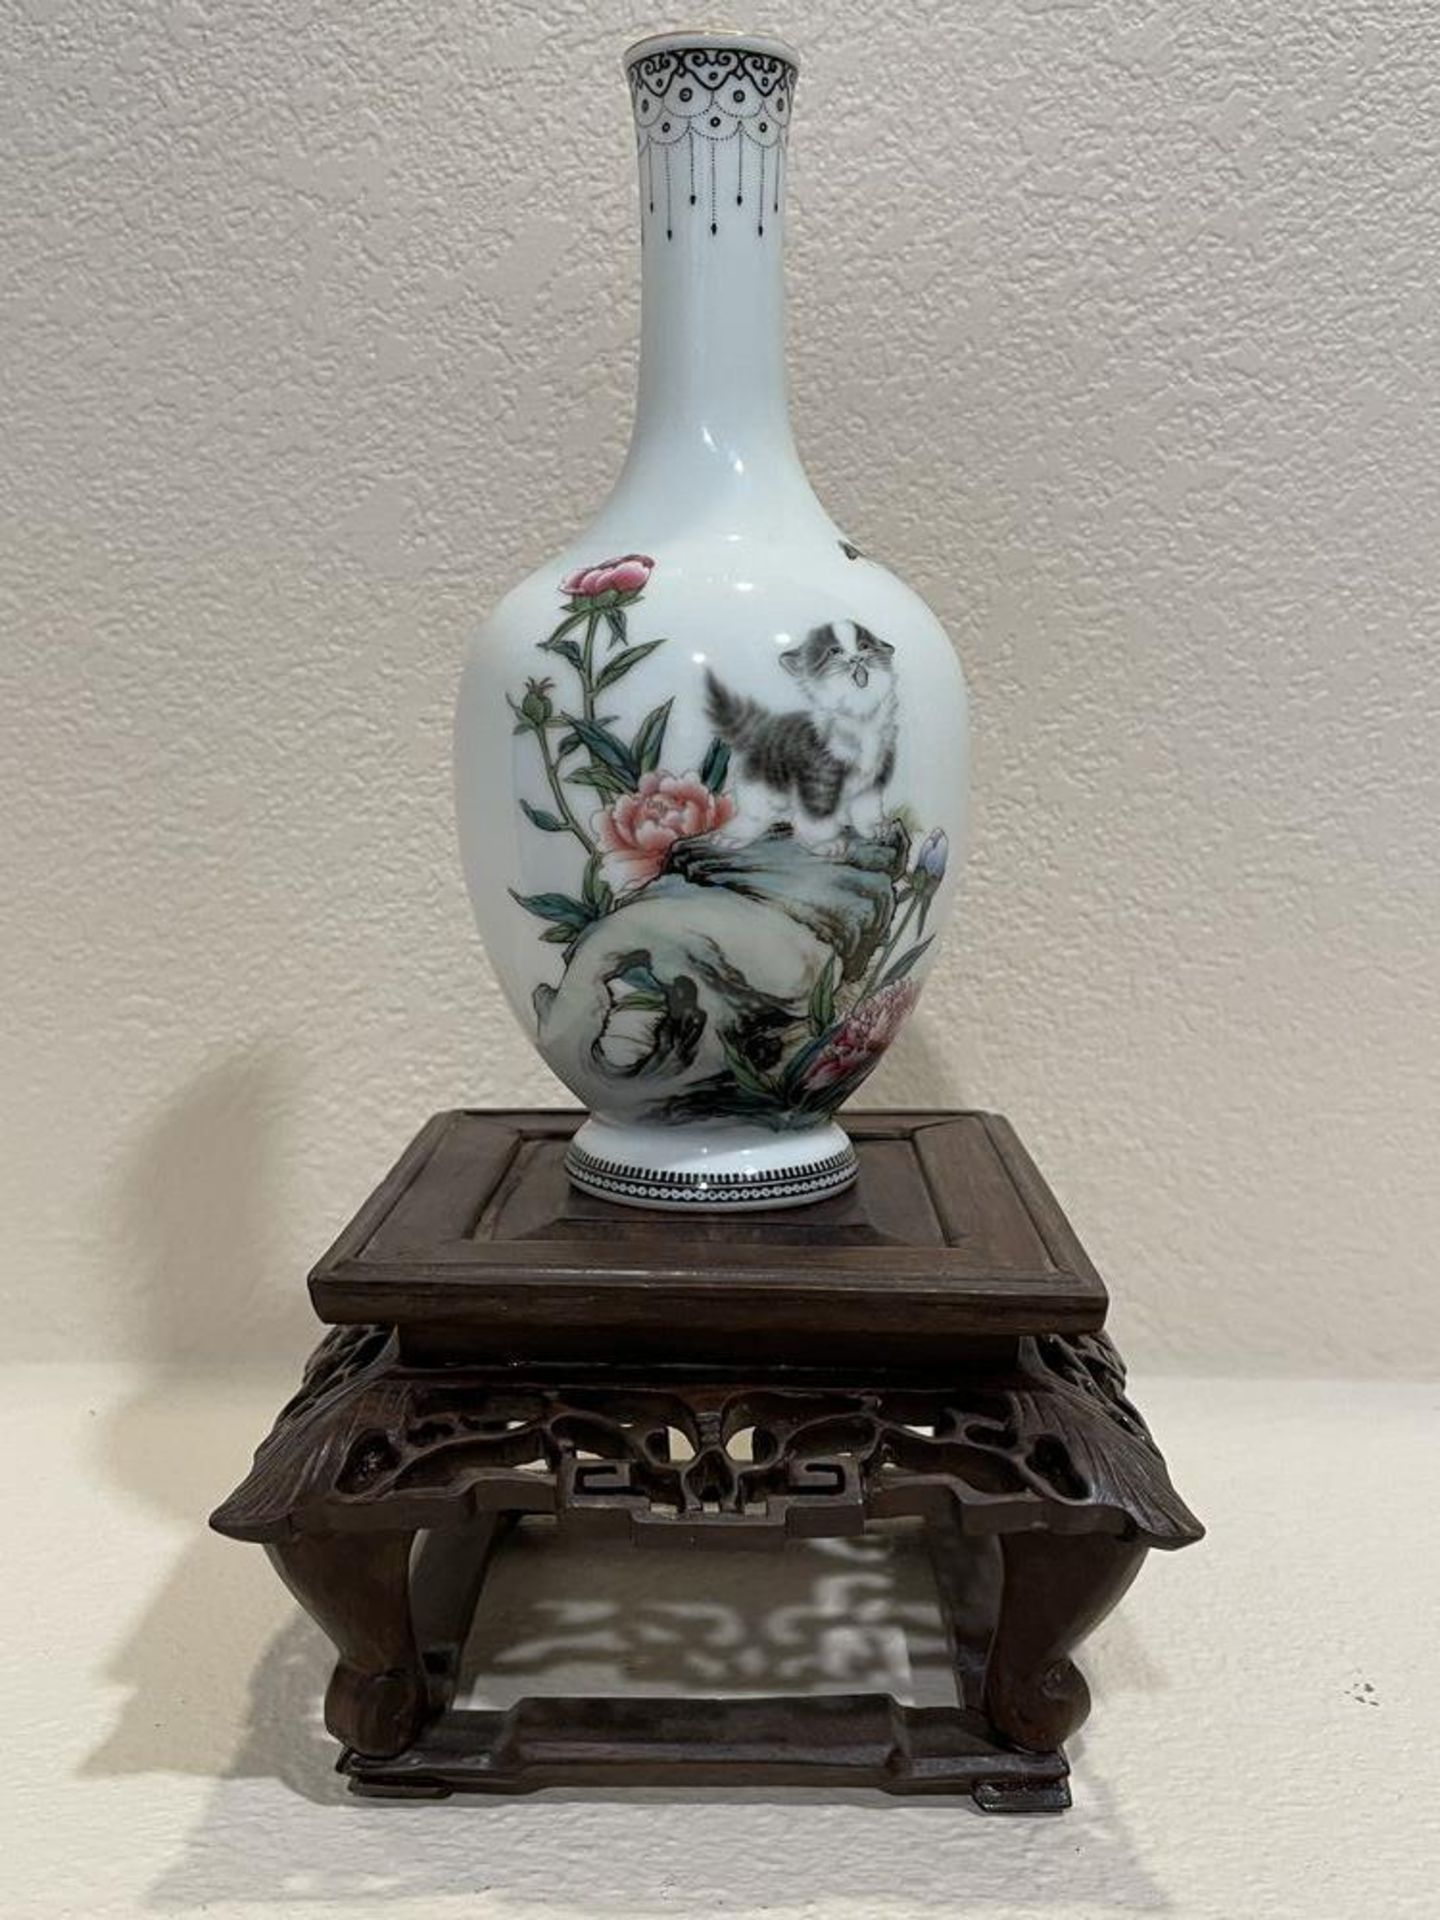 White East Asian Porcelin Vase with Cat and Flowers, Wood Base - 7" x 3.5" Vase, with base 10" x 5.5